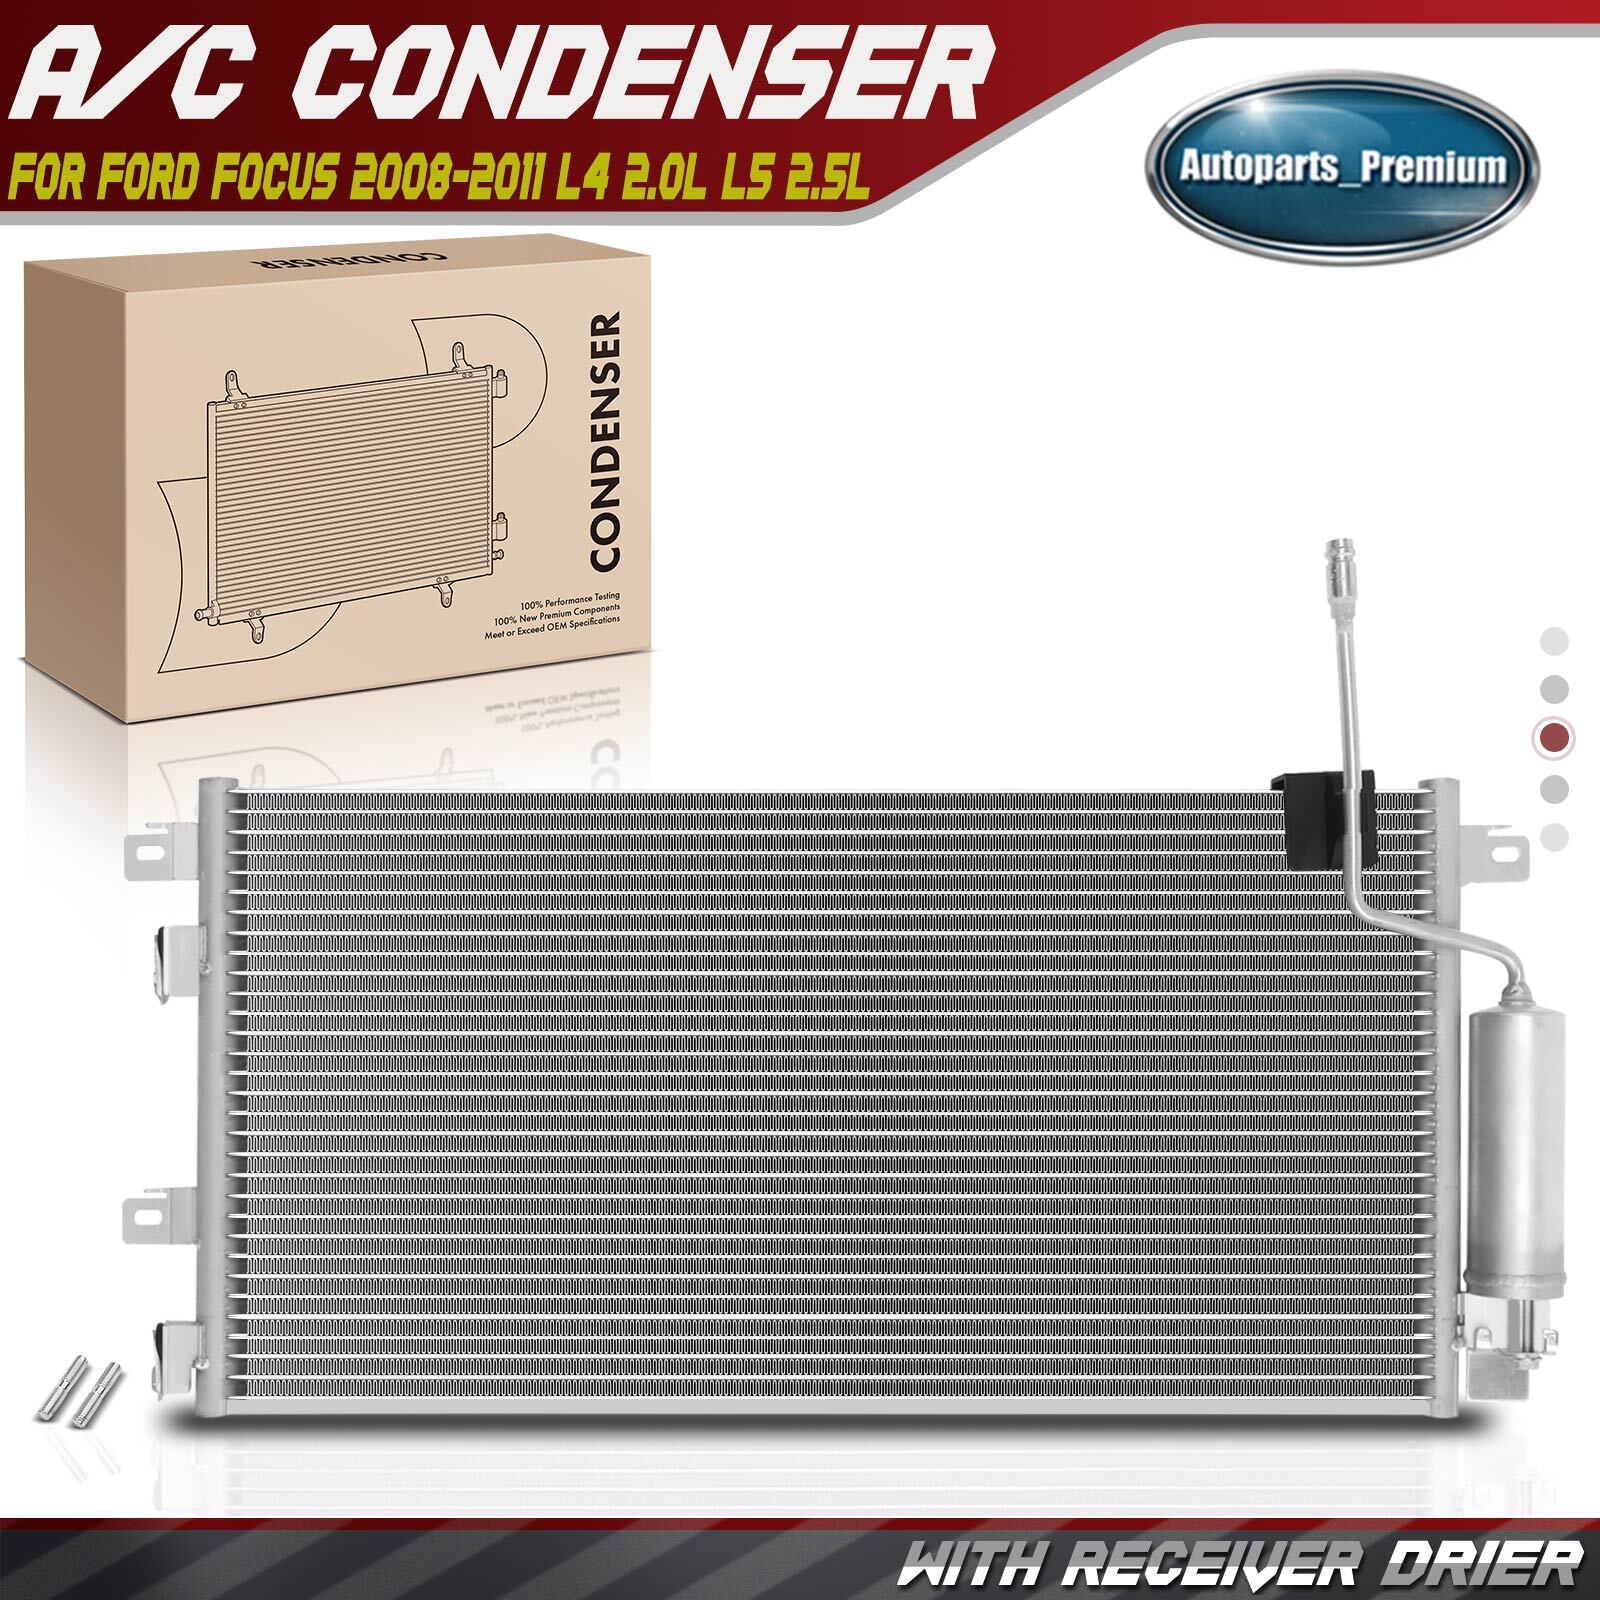 AC Condenser with Receiver Drier & Bracket for Ford Focus 2008-2011 L4 2.0L Gas